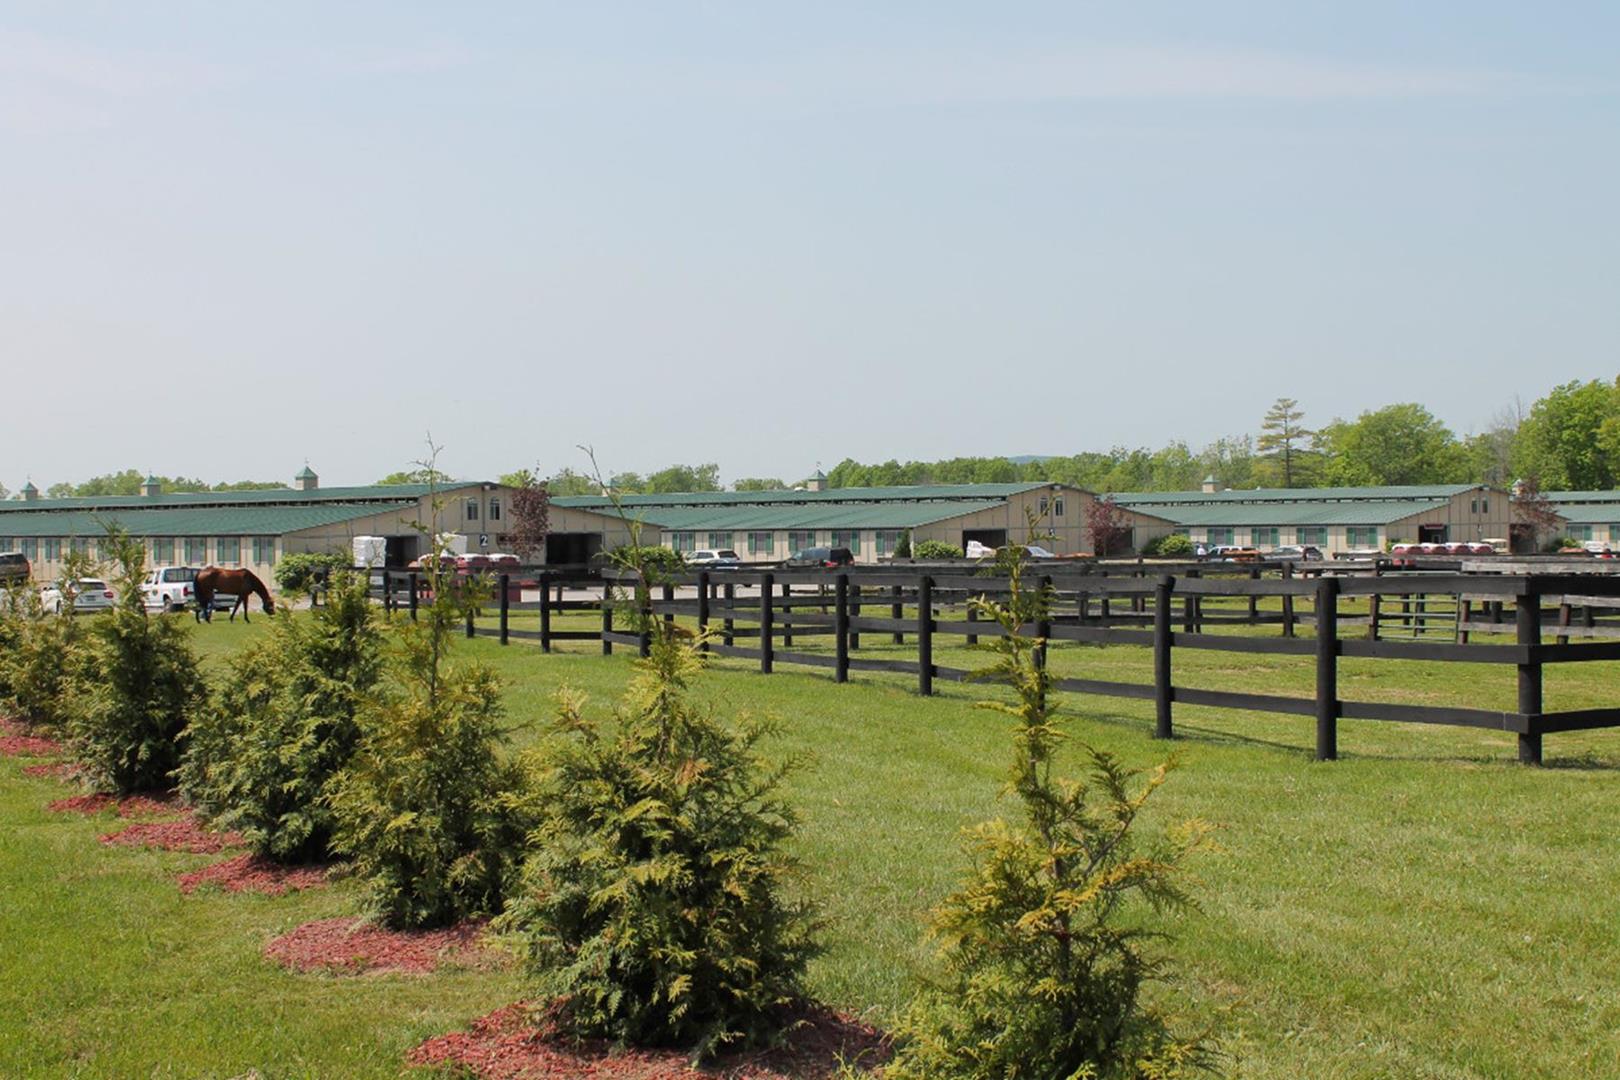 The Best Equestrian Centers in America | Sports Planning Guide